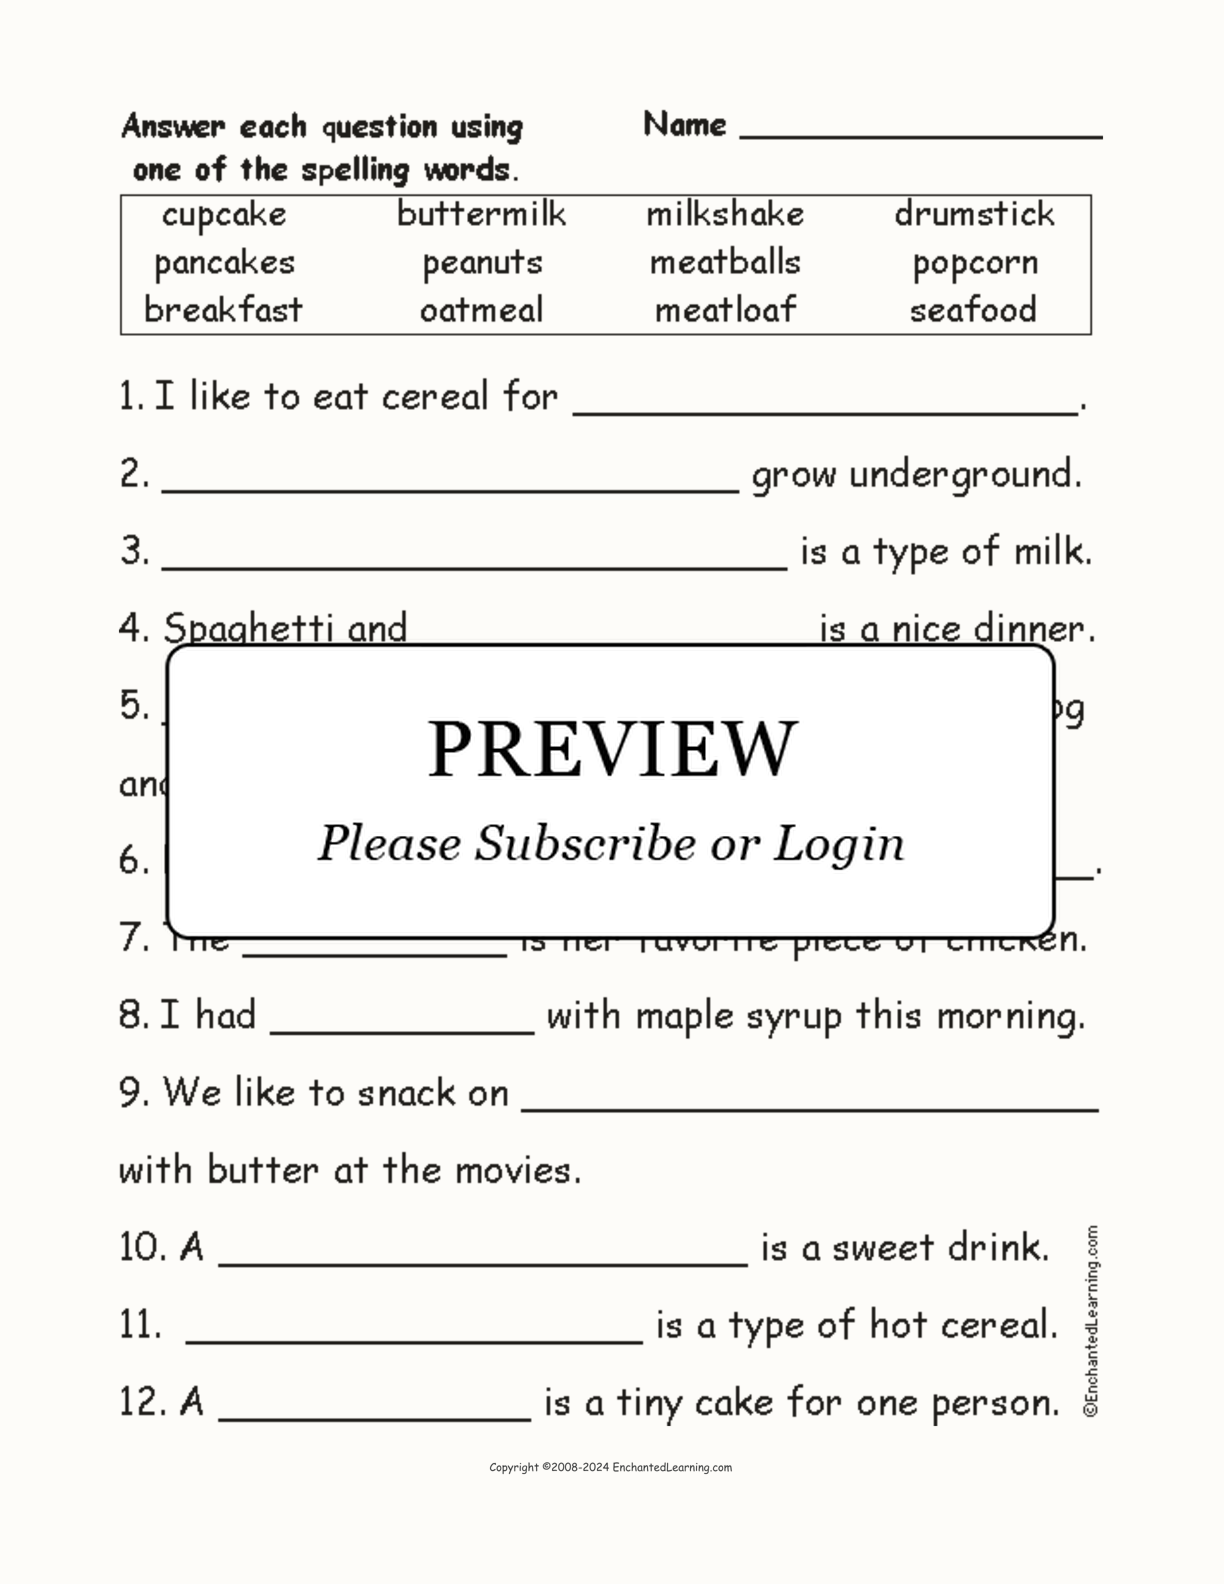 Compound Food Words: Spelling Word Questions interactive worksheet page 1